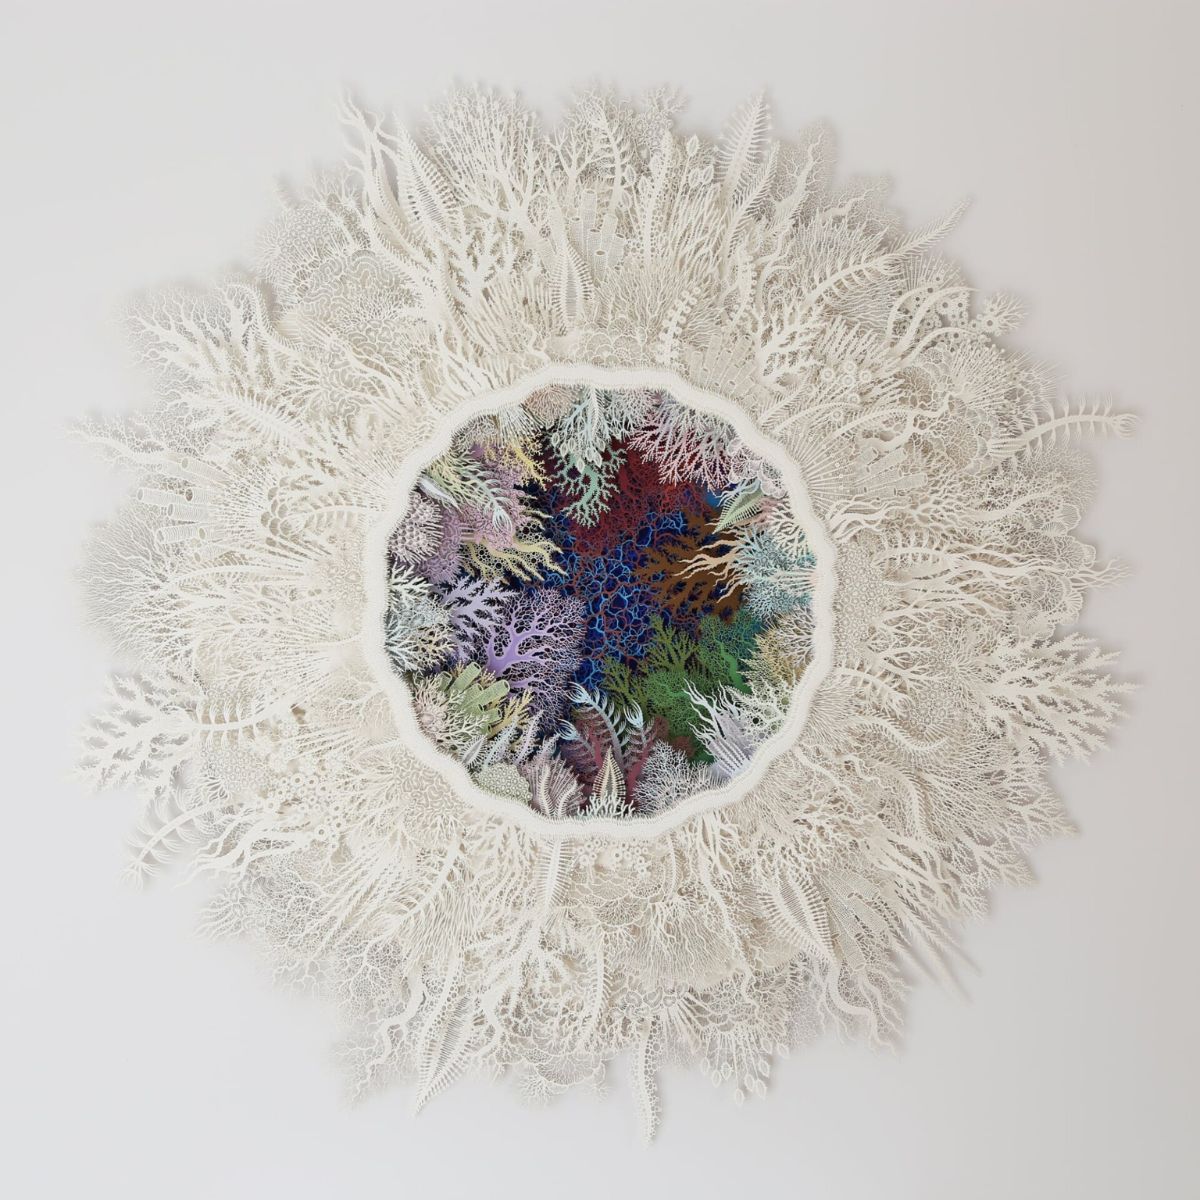 Rogan Brown cuts coral paper sculptures to illustrate coral reefs in danger on Thursd